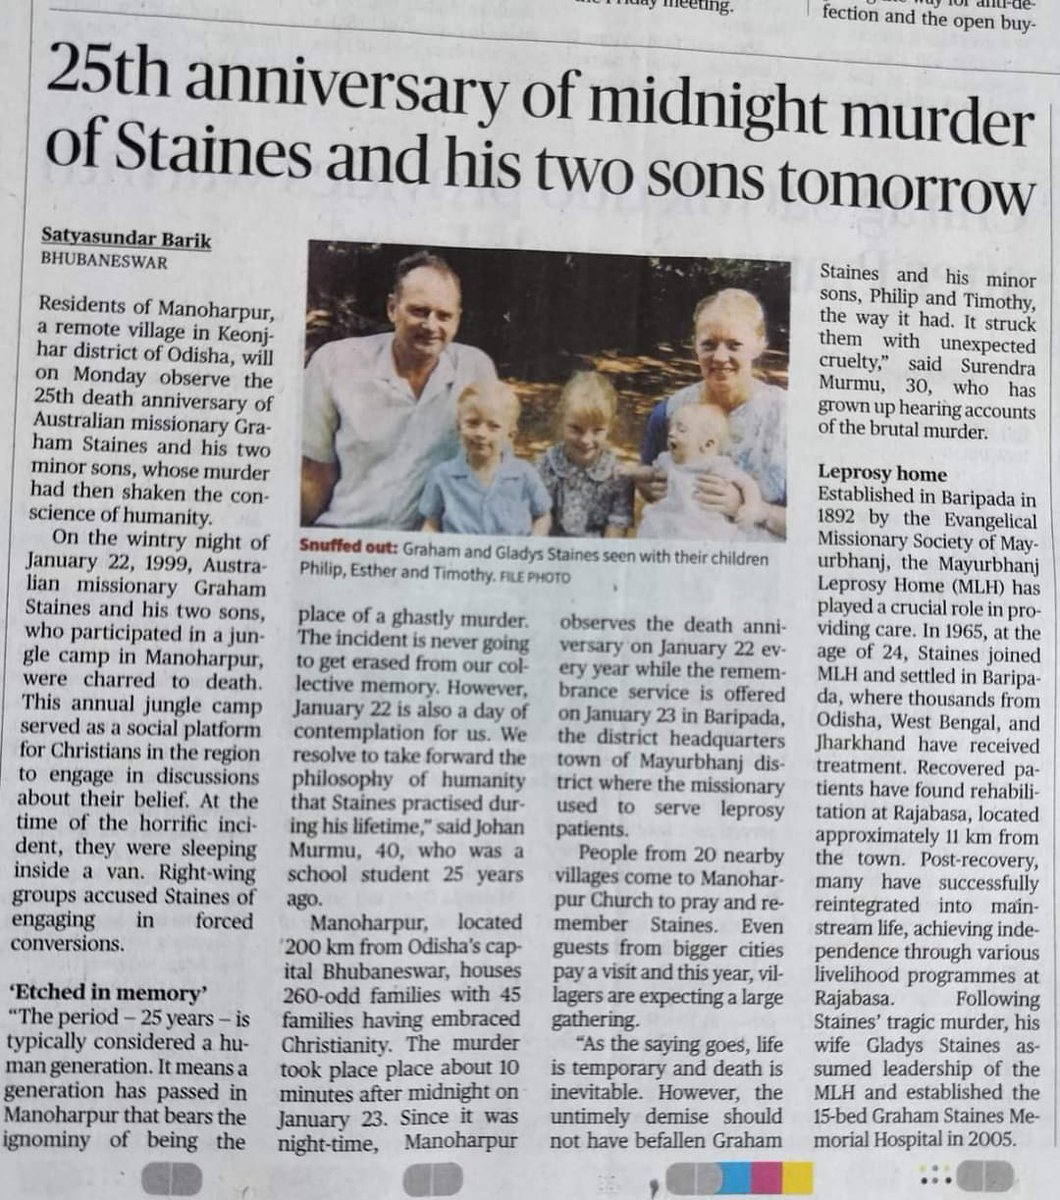 25 years ago tomorrow, on the night of 22nd of January 1999, Graham Staines and his two young children were burnt alive by the right wing Hindu nationalists. KR Narayanan, the then - Indian President, condemned the murder as one of the darkest deeds.